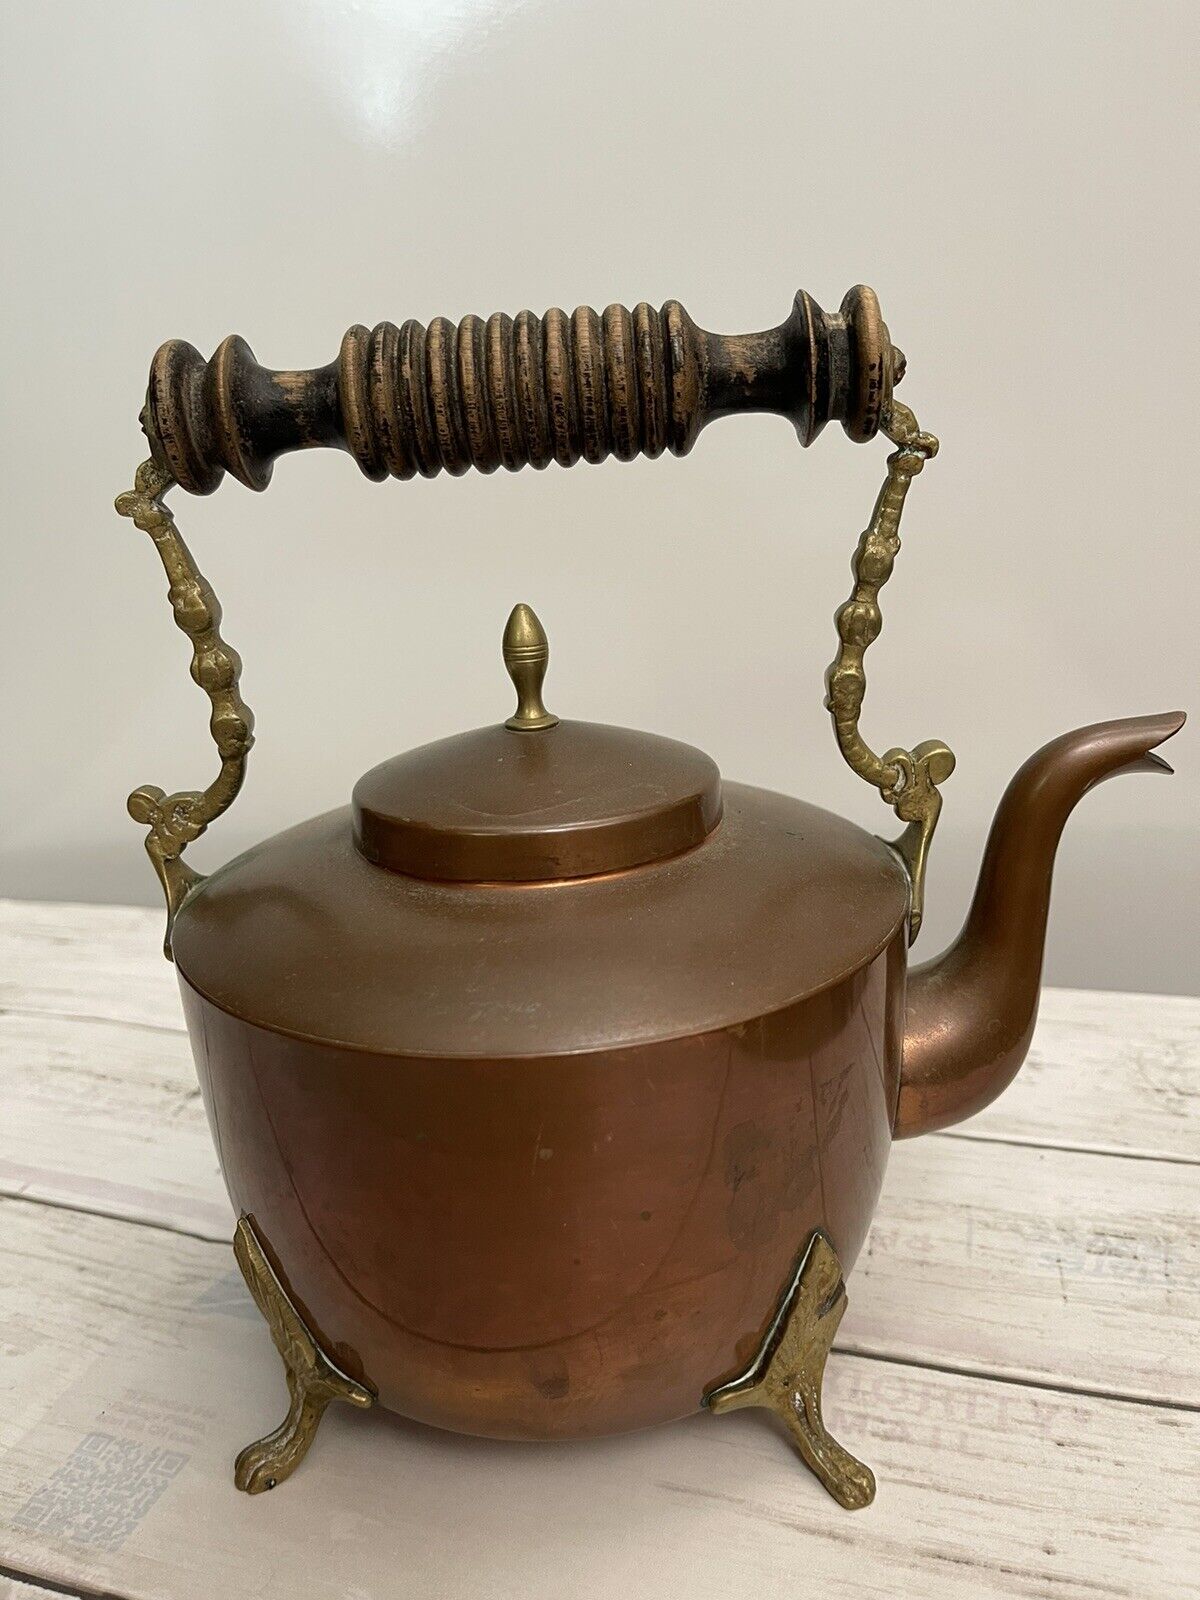 Vintage Made In Sweden 🇸🇪 Teapot Kettle Copper and Brass